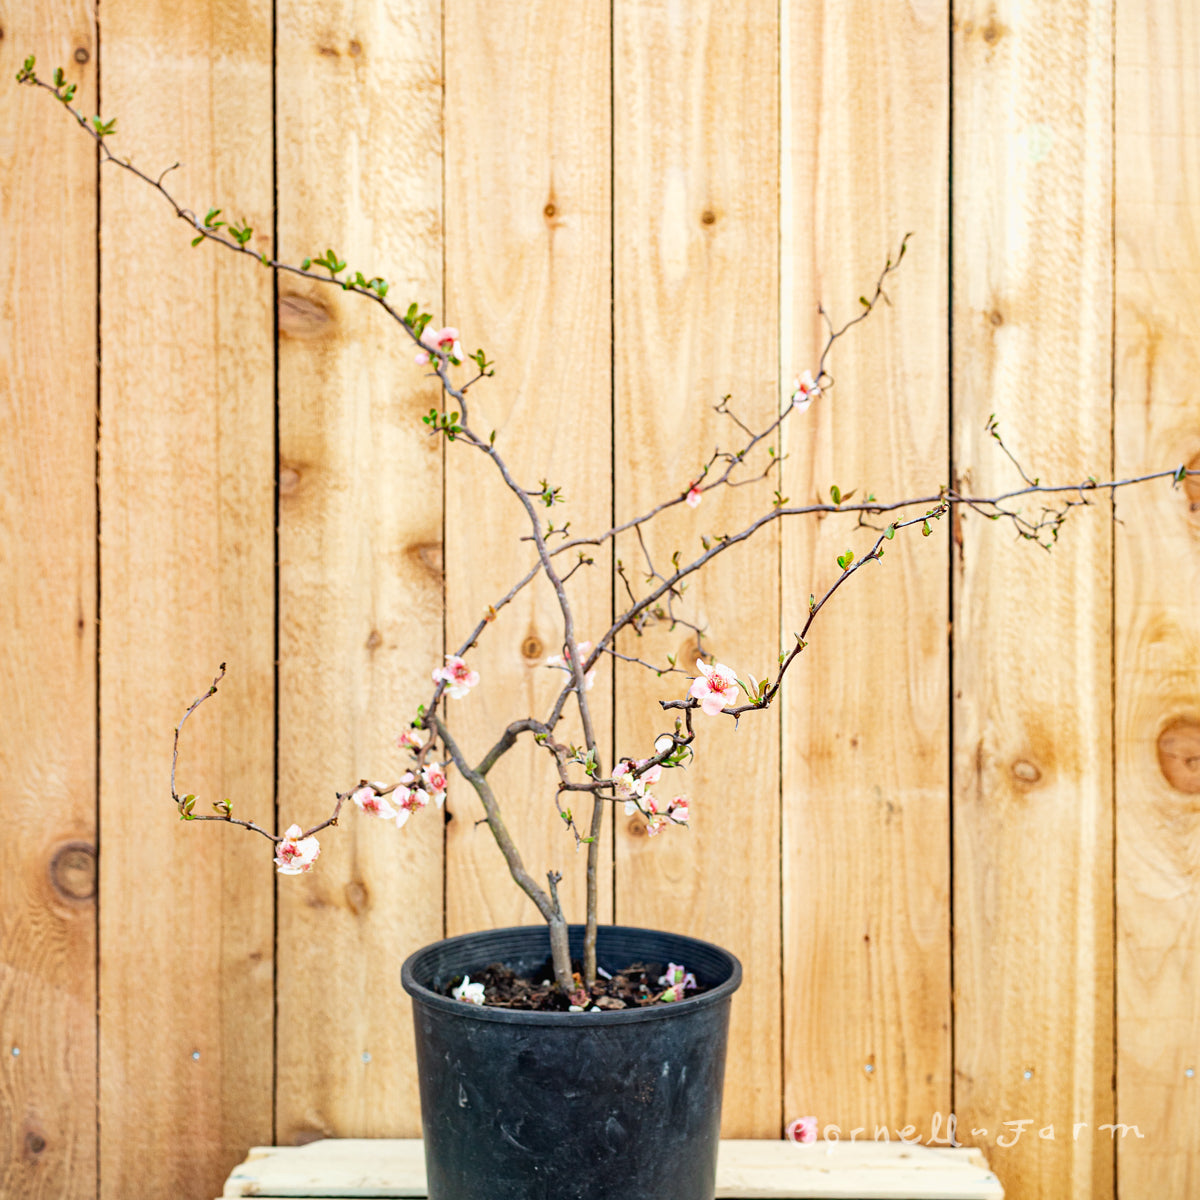 Chaenomeles s. Contorta 2 gal Flowering Quince